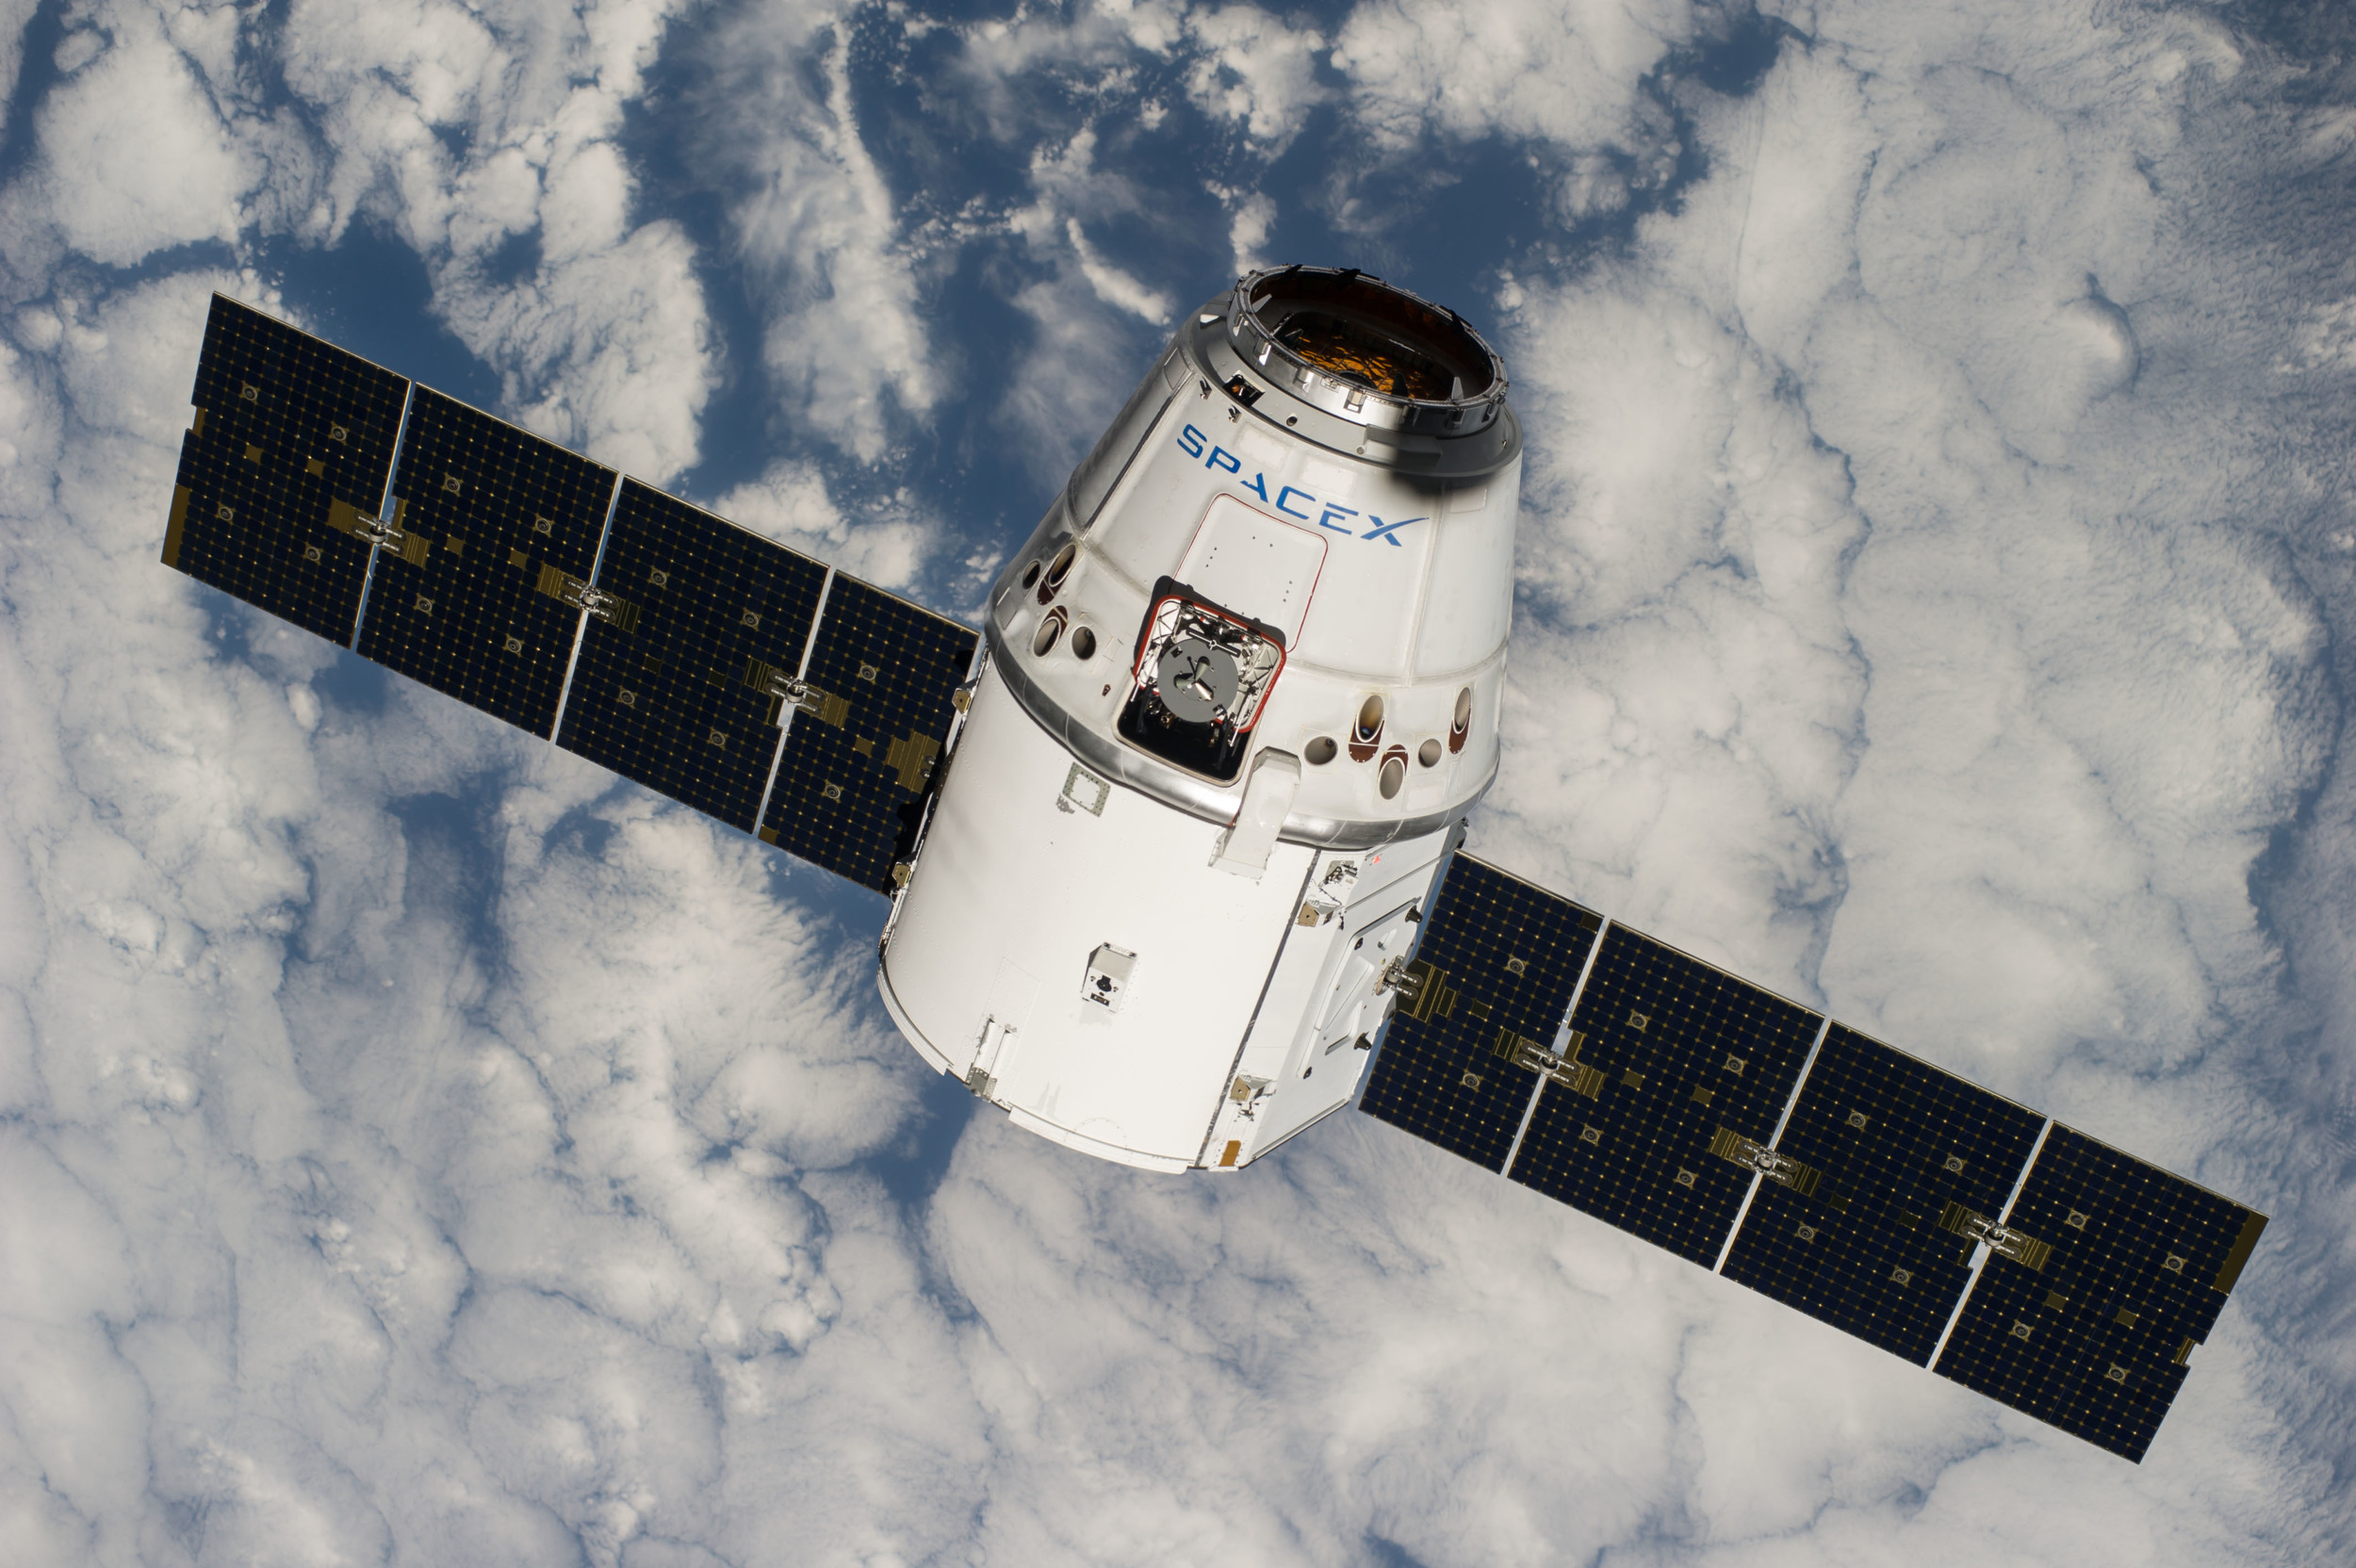  Dragon approaches the International Space Station from below. Photo Credit: NASA 